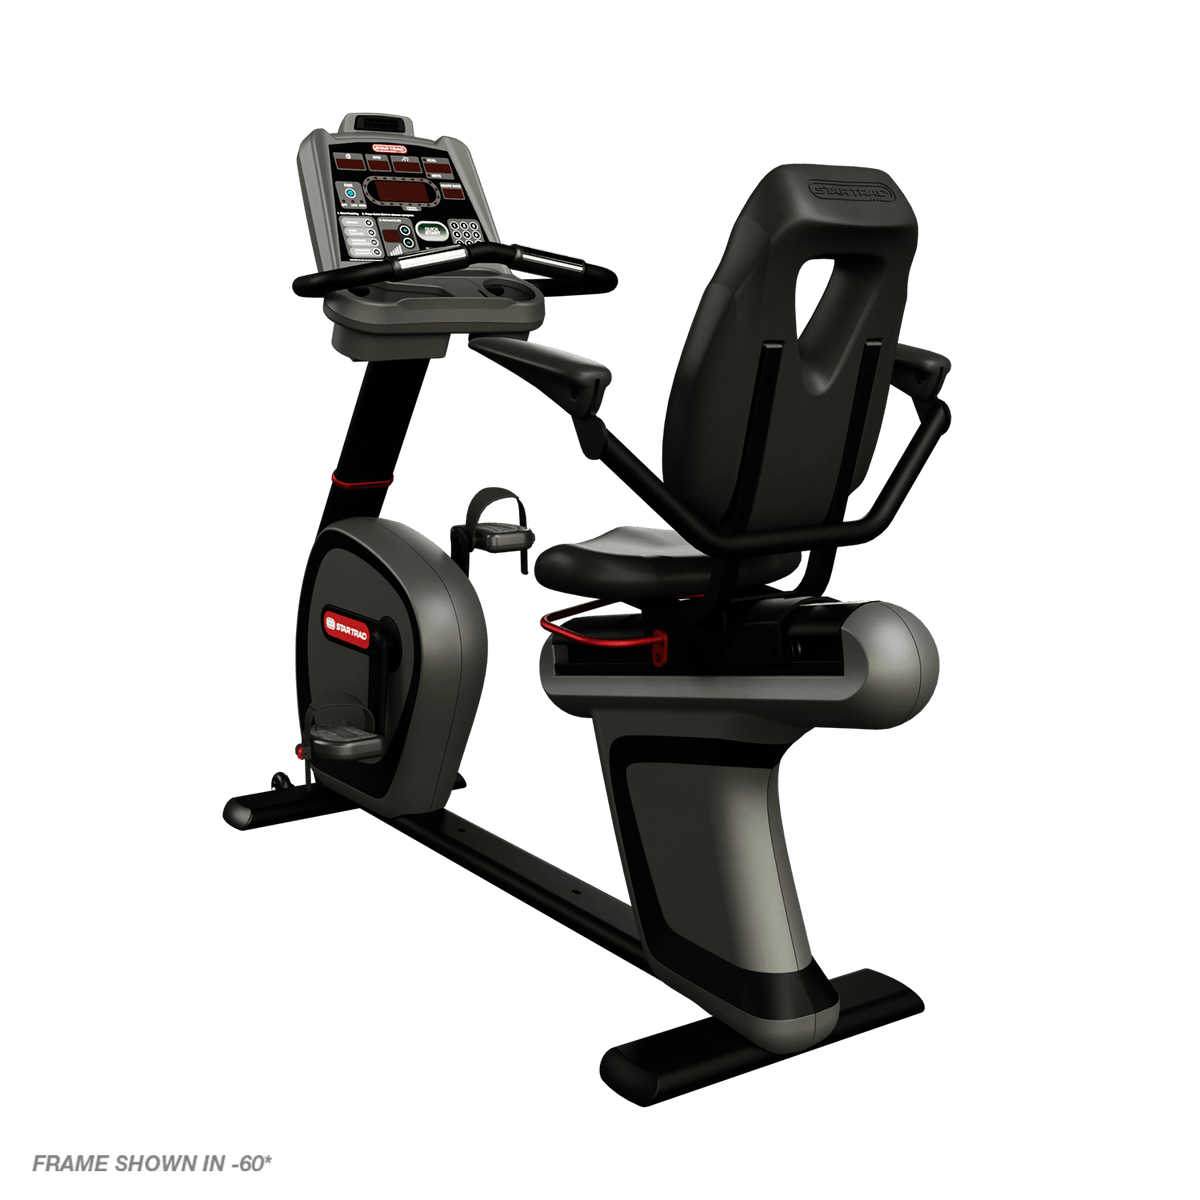 Star Trac S Series Recumbent Bike with LCD Console - New